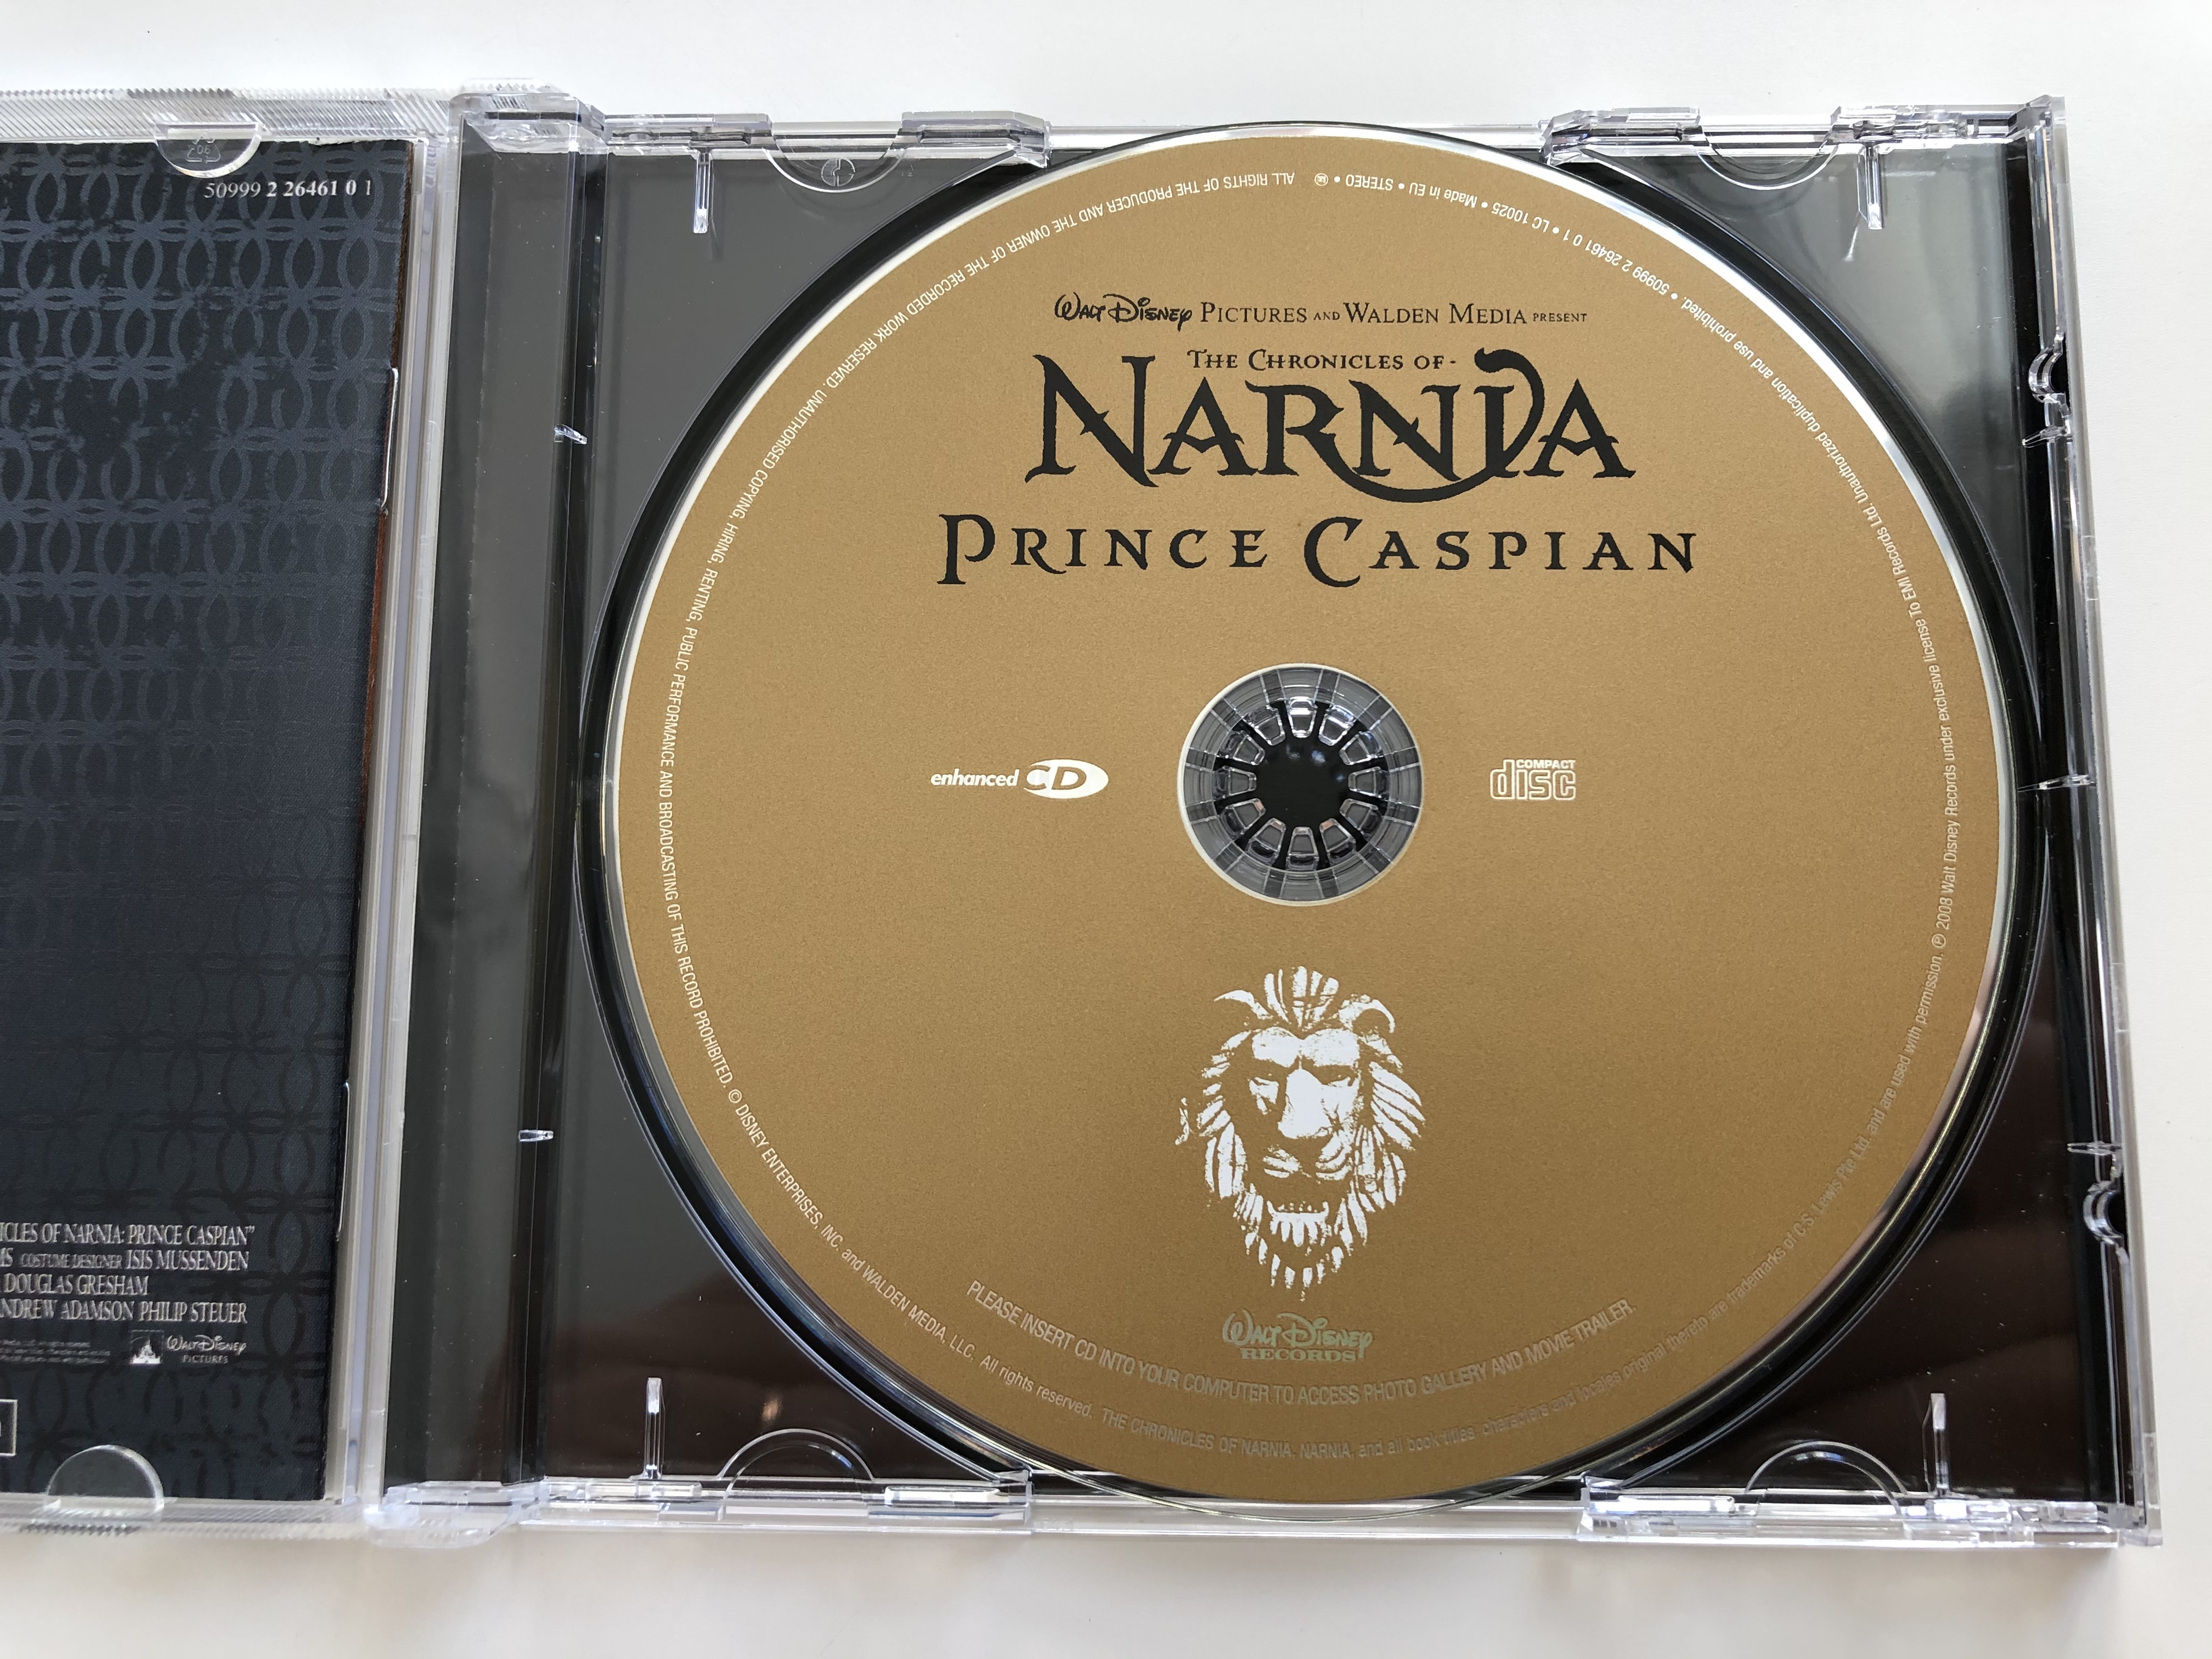 the-chronicles-of-narnia-prince-caspian-music-composed-by-harry-gregson-williams-an-original-walt-disney-records-soundtrack-walt-disney-records-audio-cd-2008-5099922646101-12-.jpg